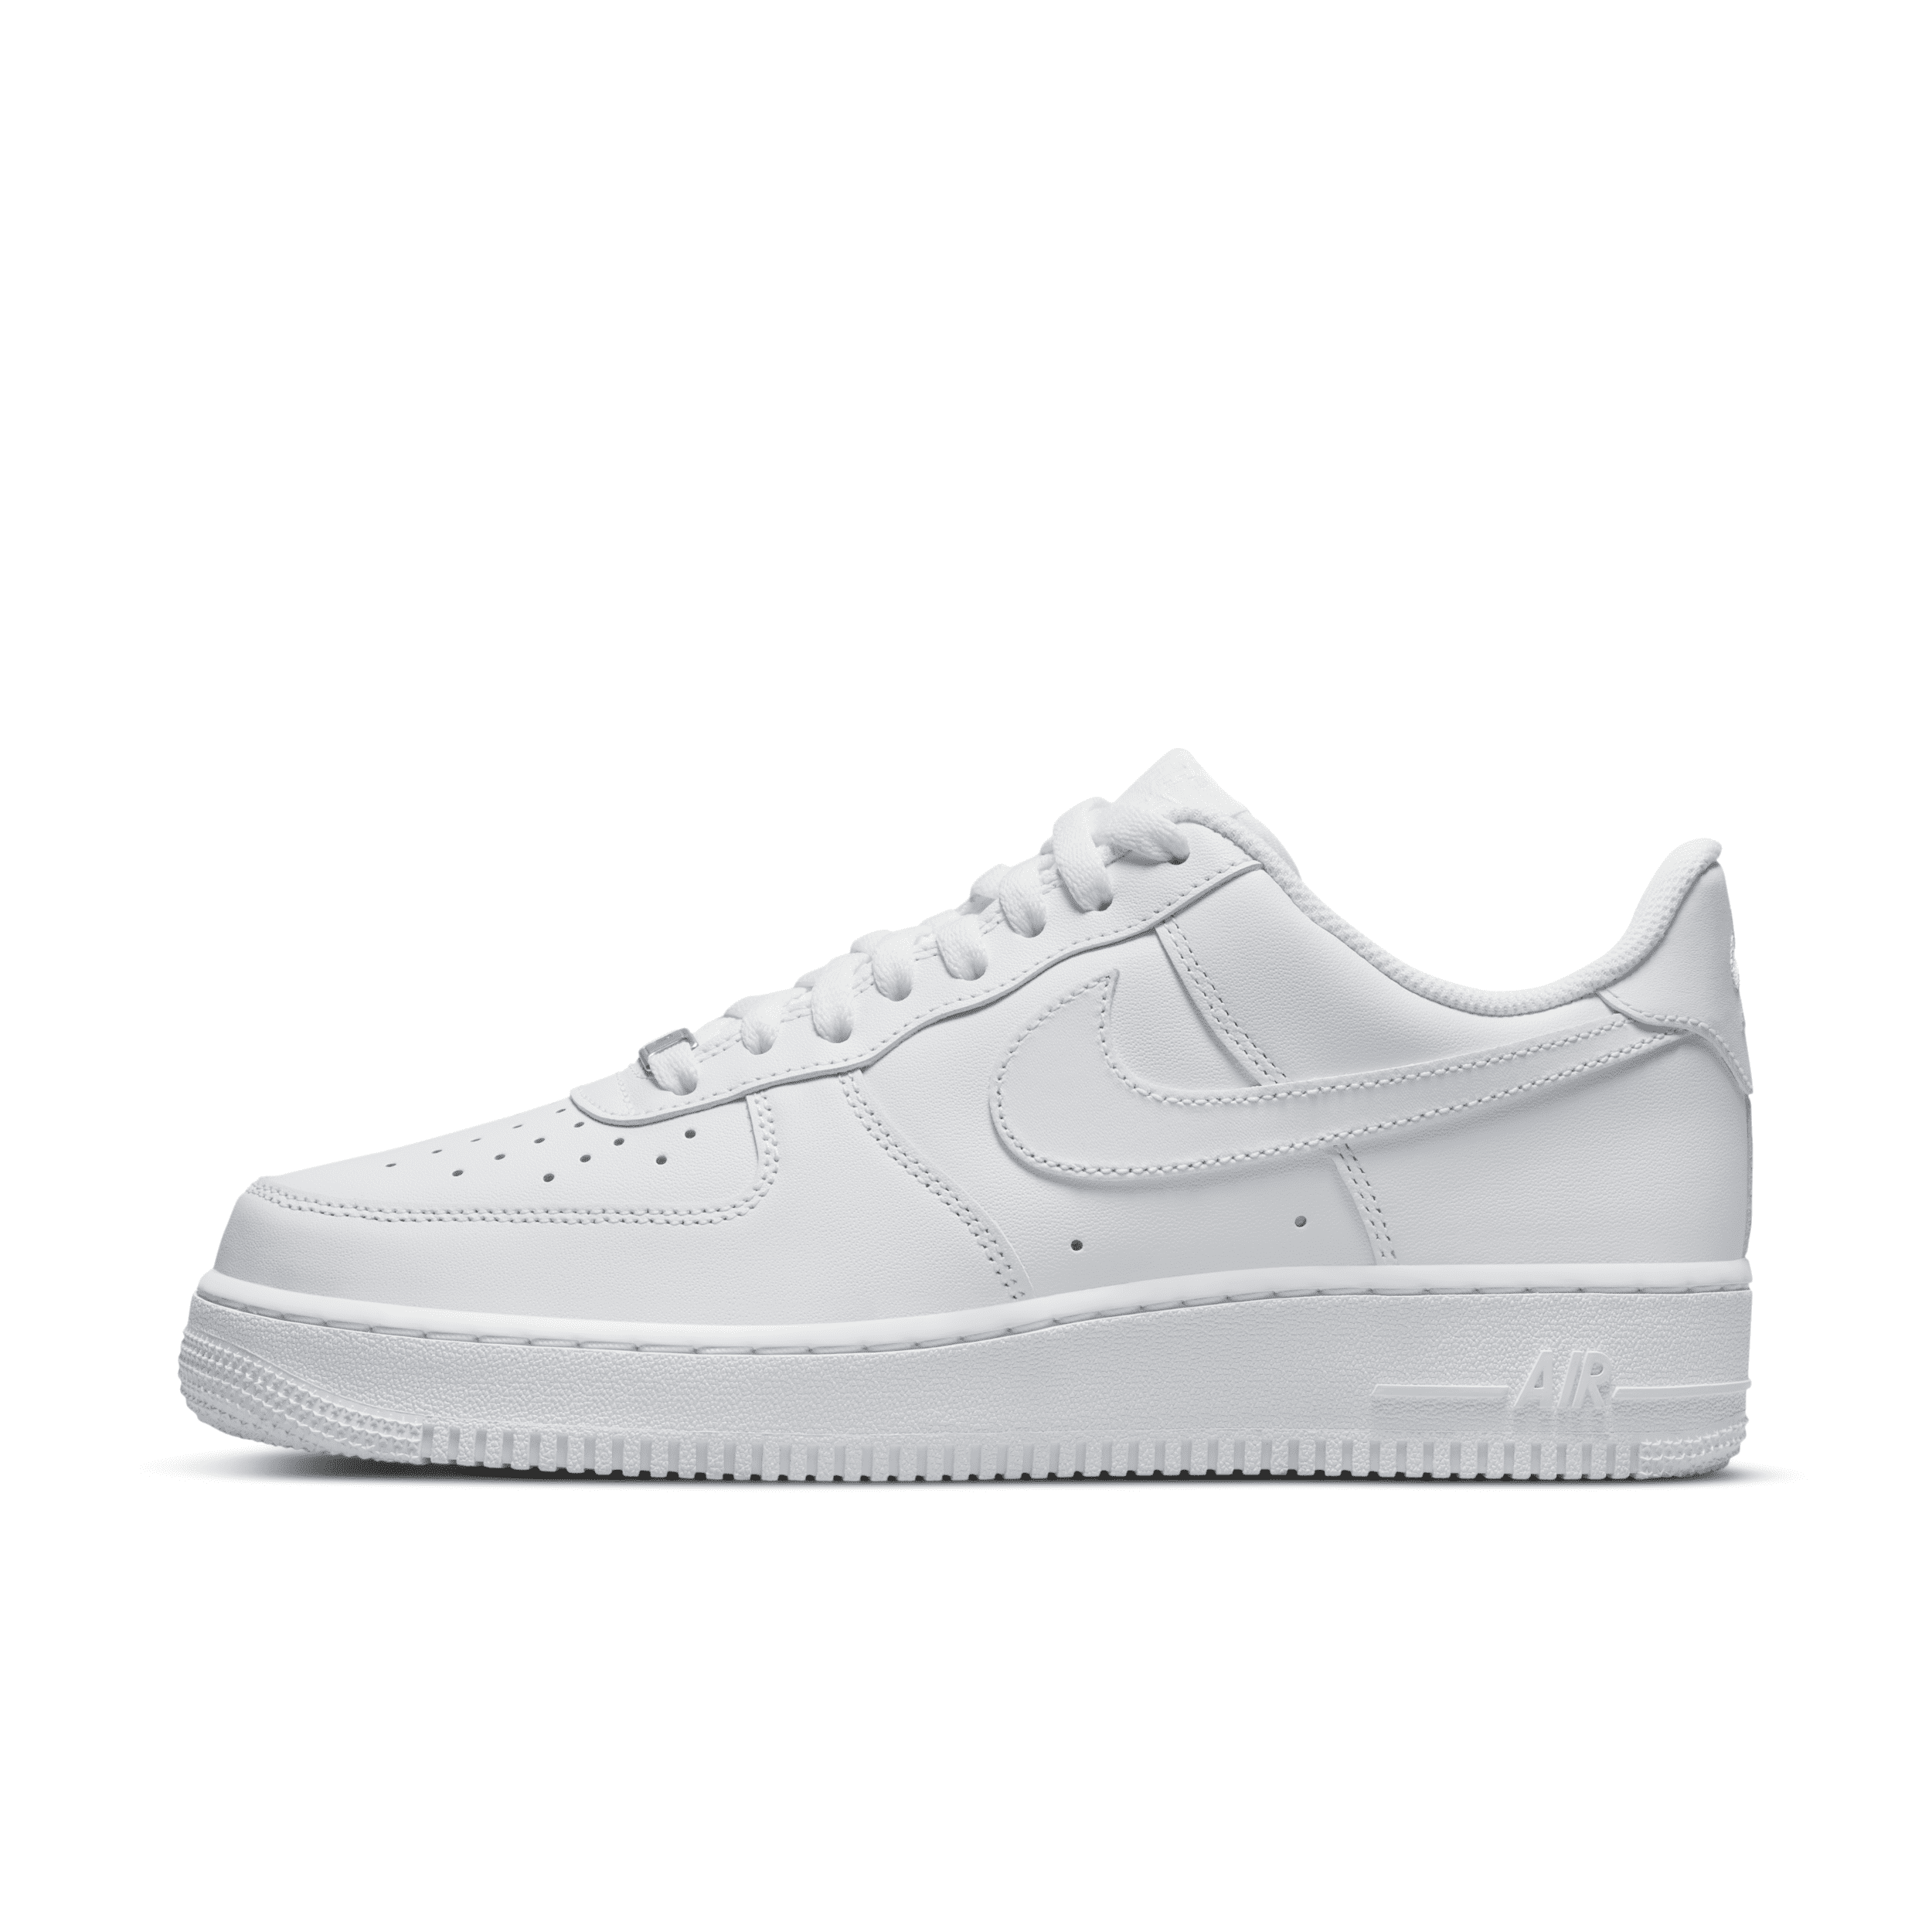 Nike Men's Air Force 1 '07 Shoes in White, Size: 11.5 | CW2288-111